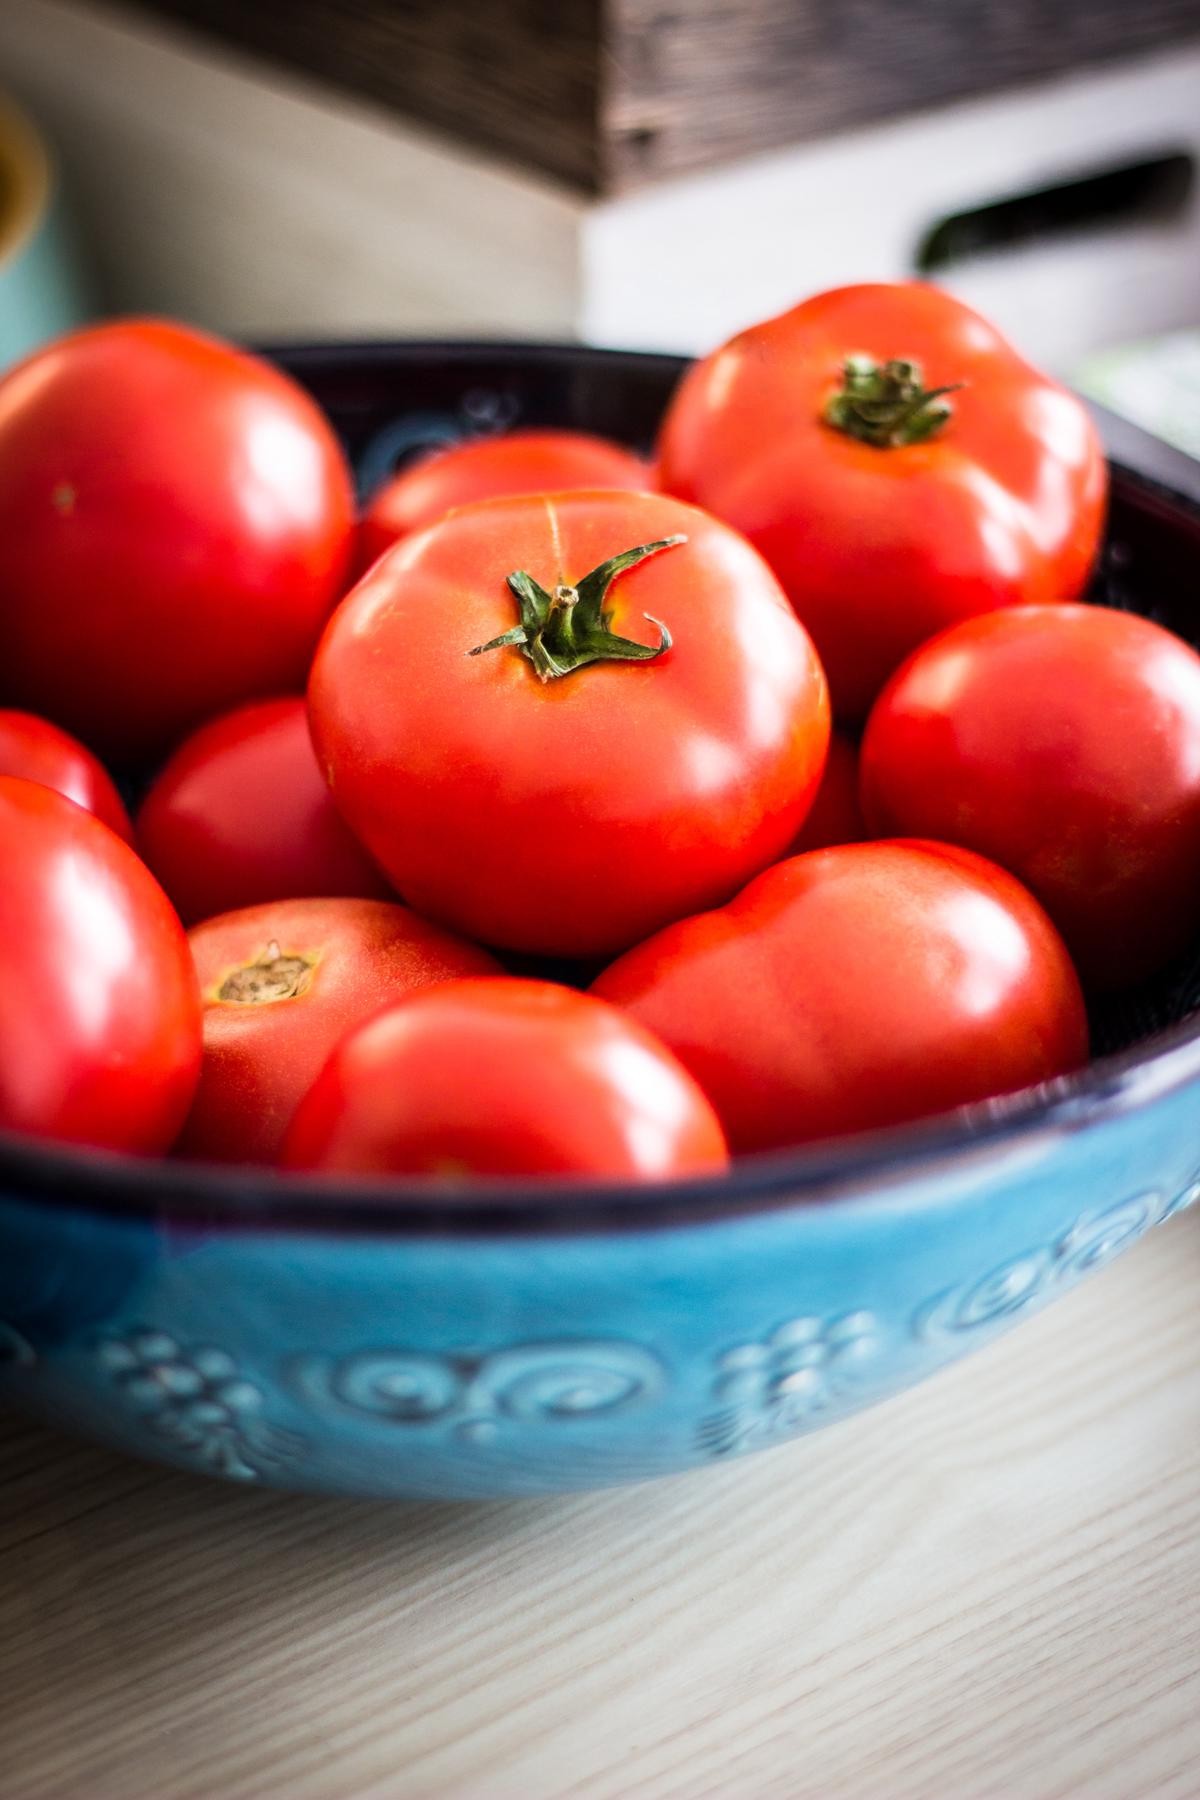 A bowl filled with tomato seeds surrounded by tomato slices and leaves.